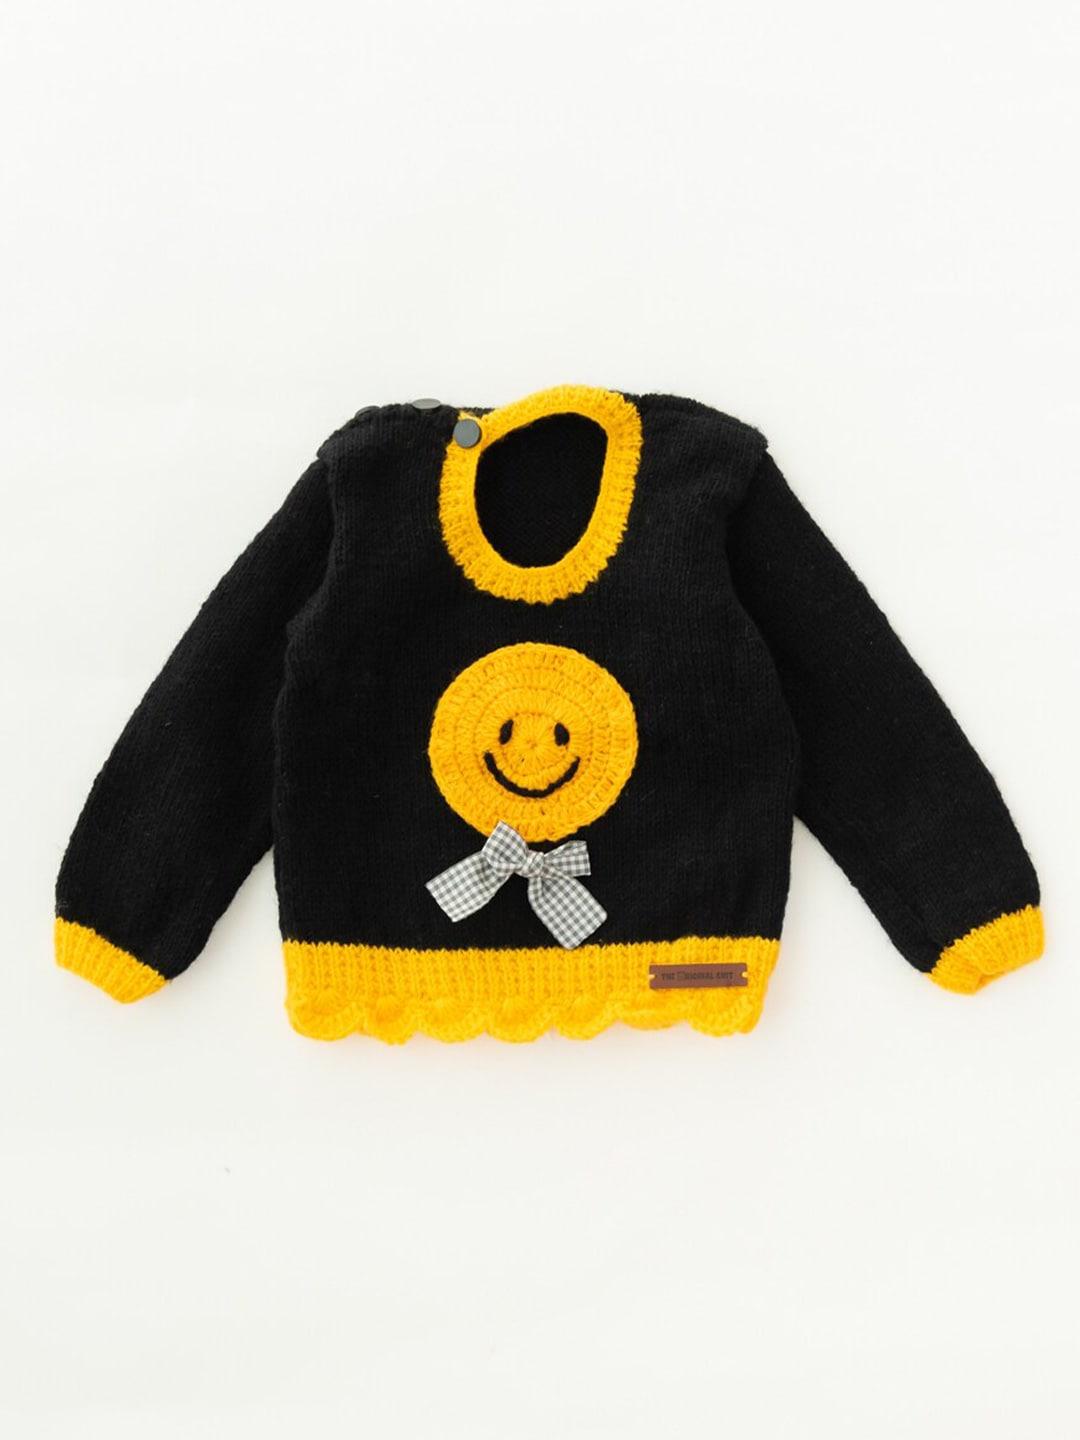 the-original-knit-infants-kids-black-&-yellow-embroidered-pullover-sweater